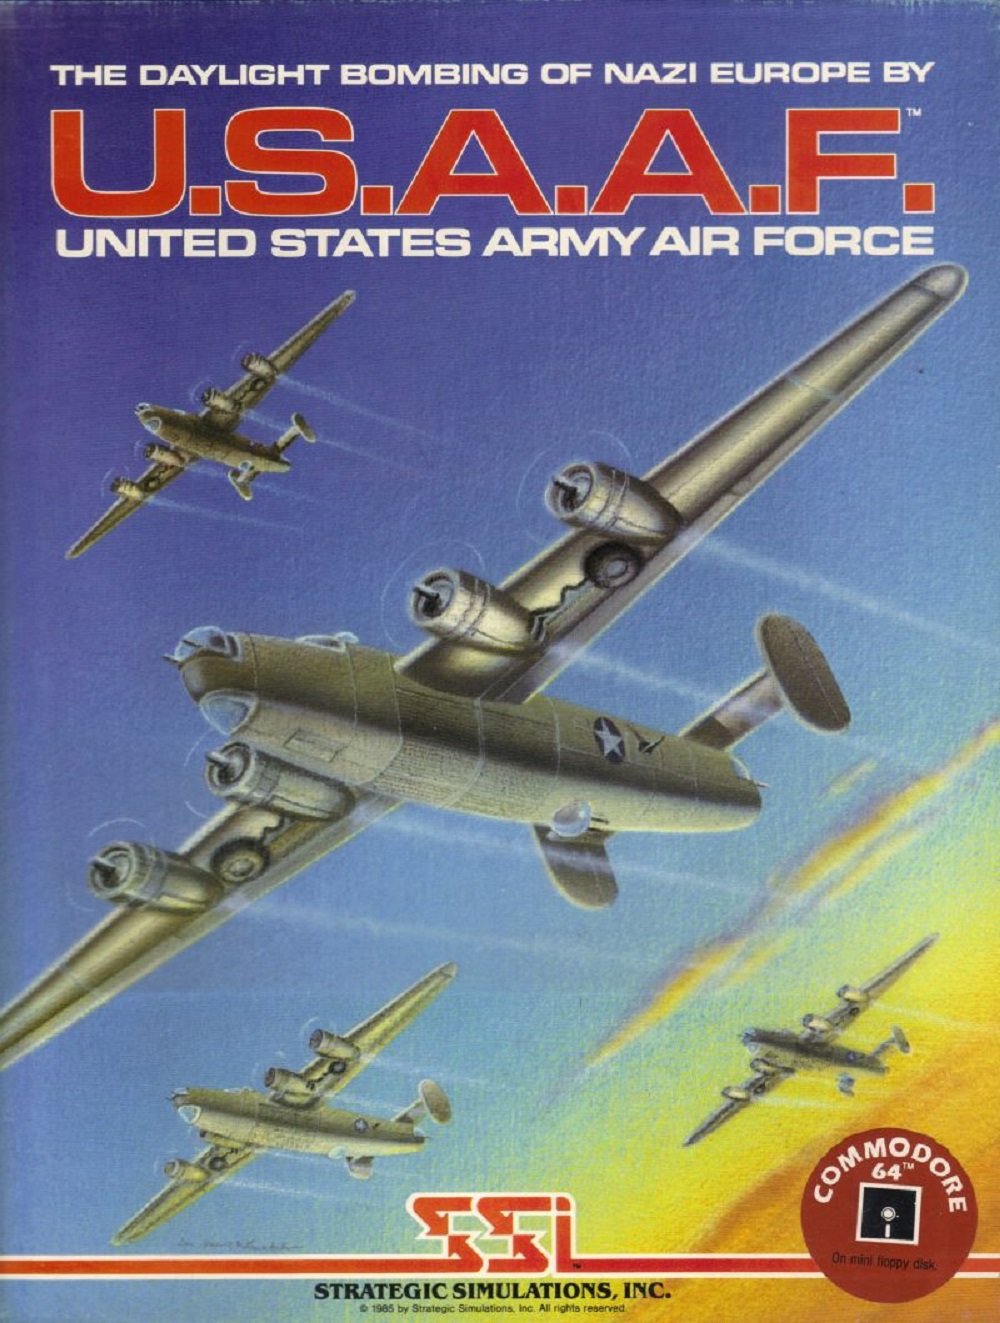 Image of U.S.A.A.F. - United States Army Air Force